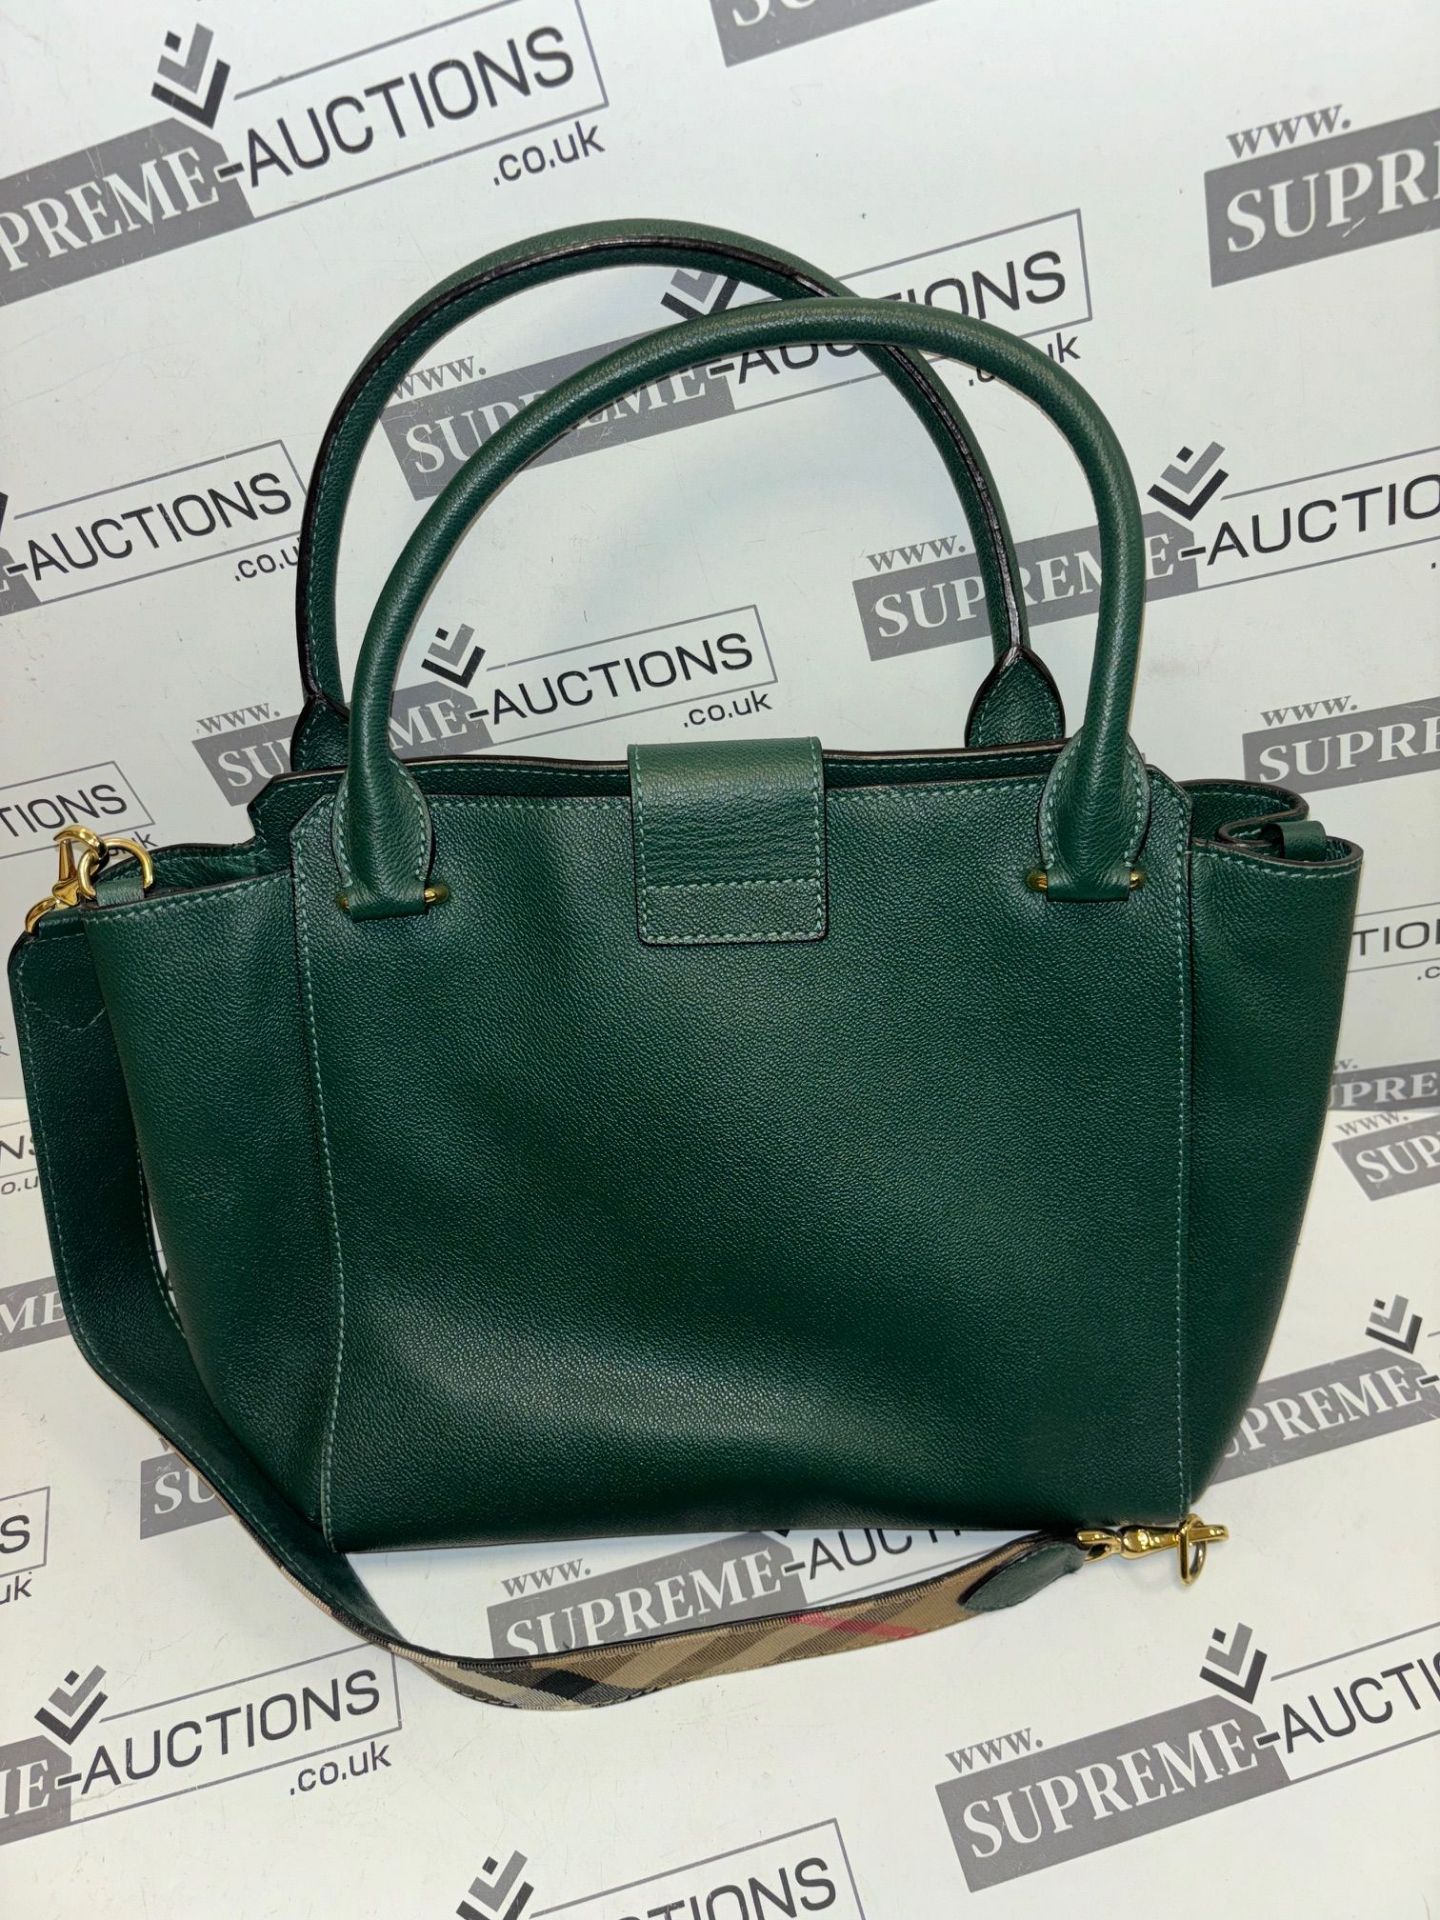 Burberry Green Buckle Tote Leather. 40x25cm. - Image 9 of 11